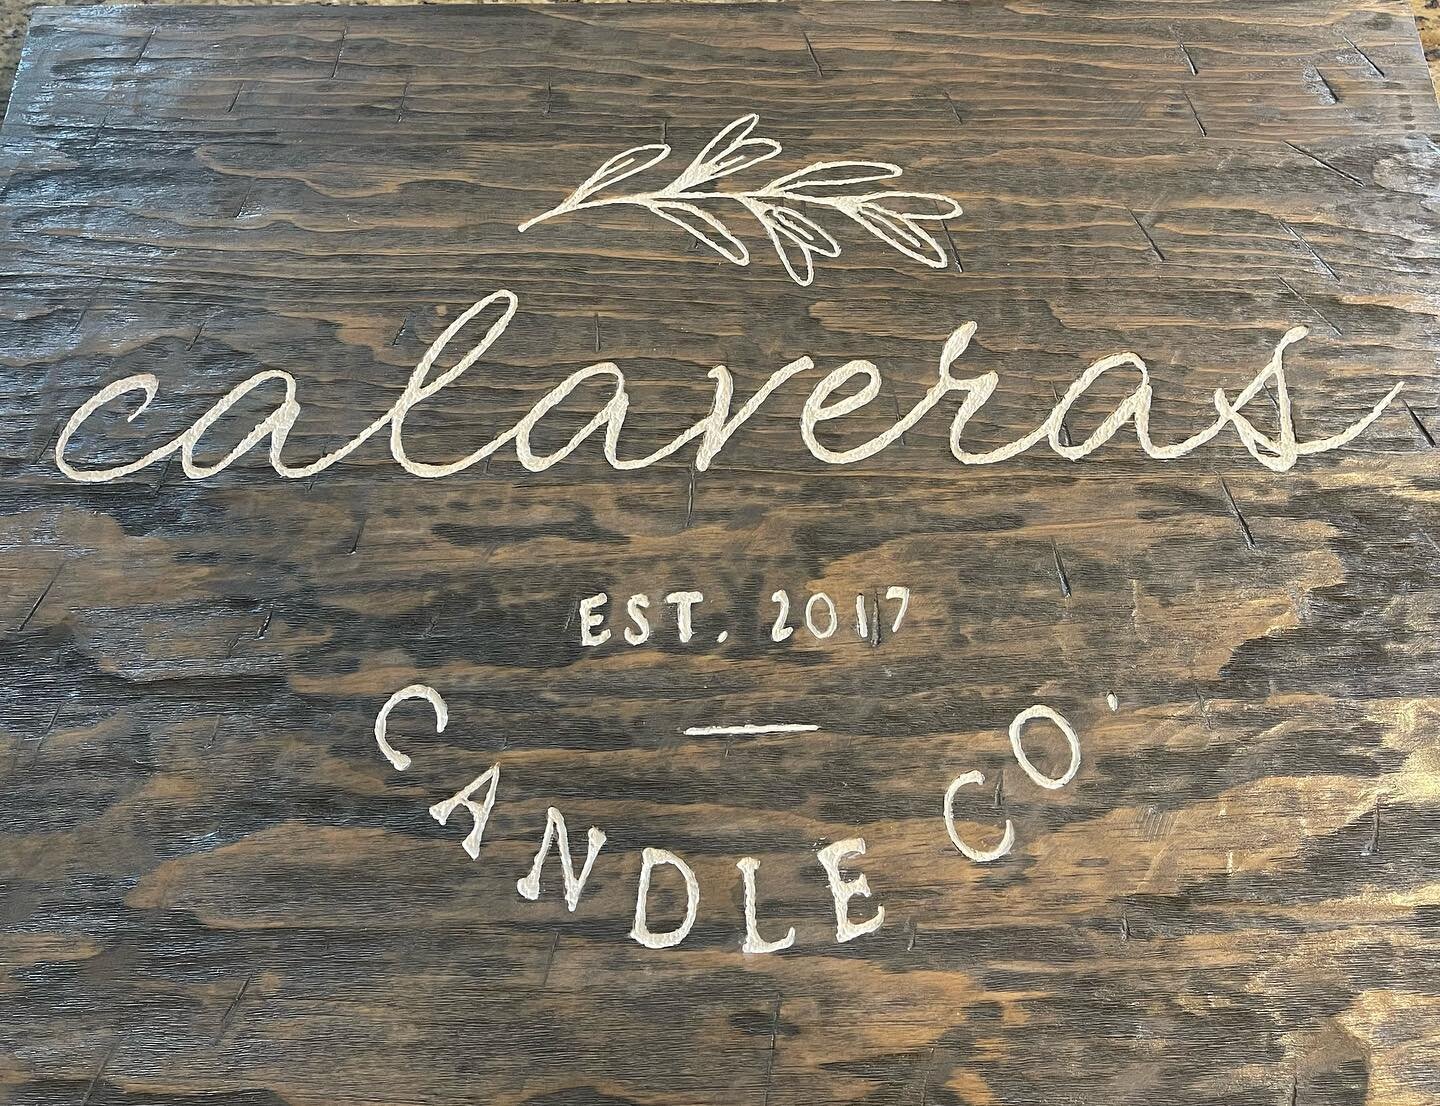 What do we think of the new sign! #candlesofinstagram #handmade #custommade #calaverascounty